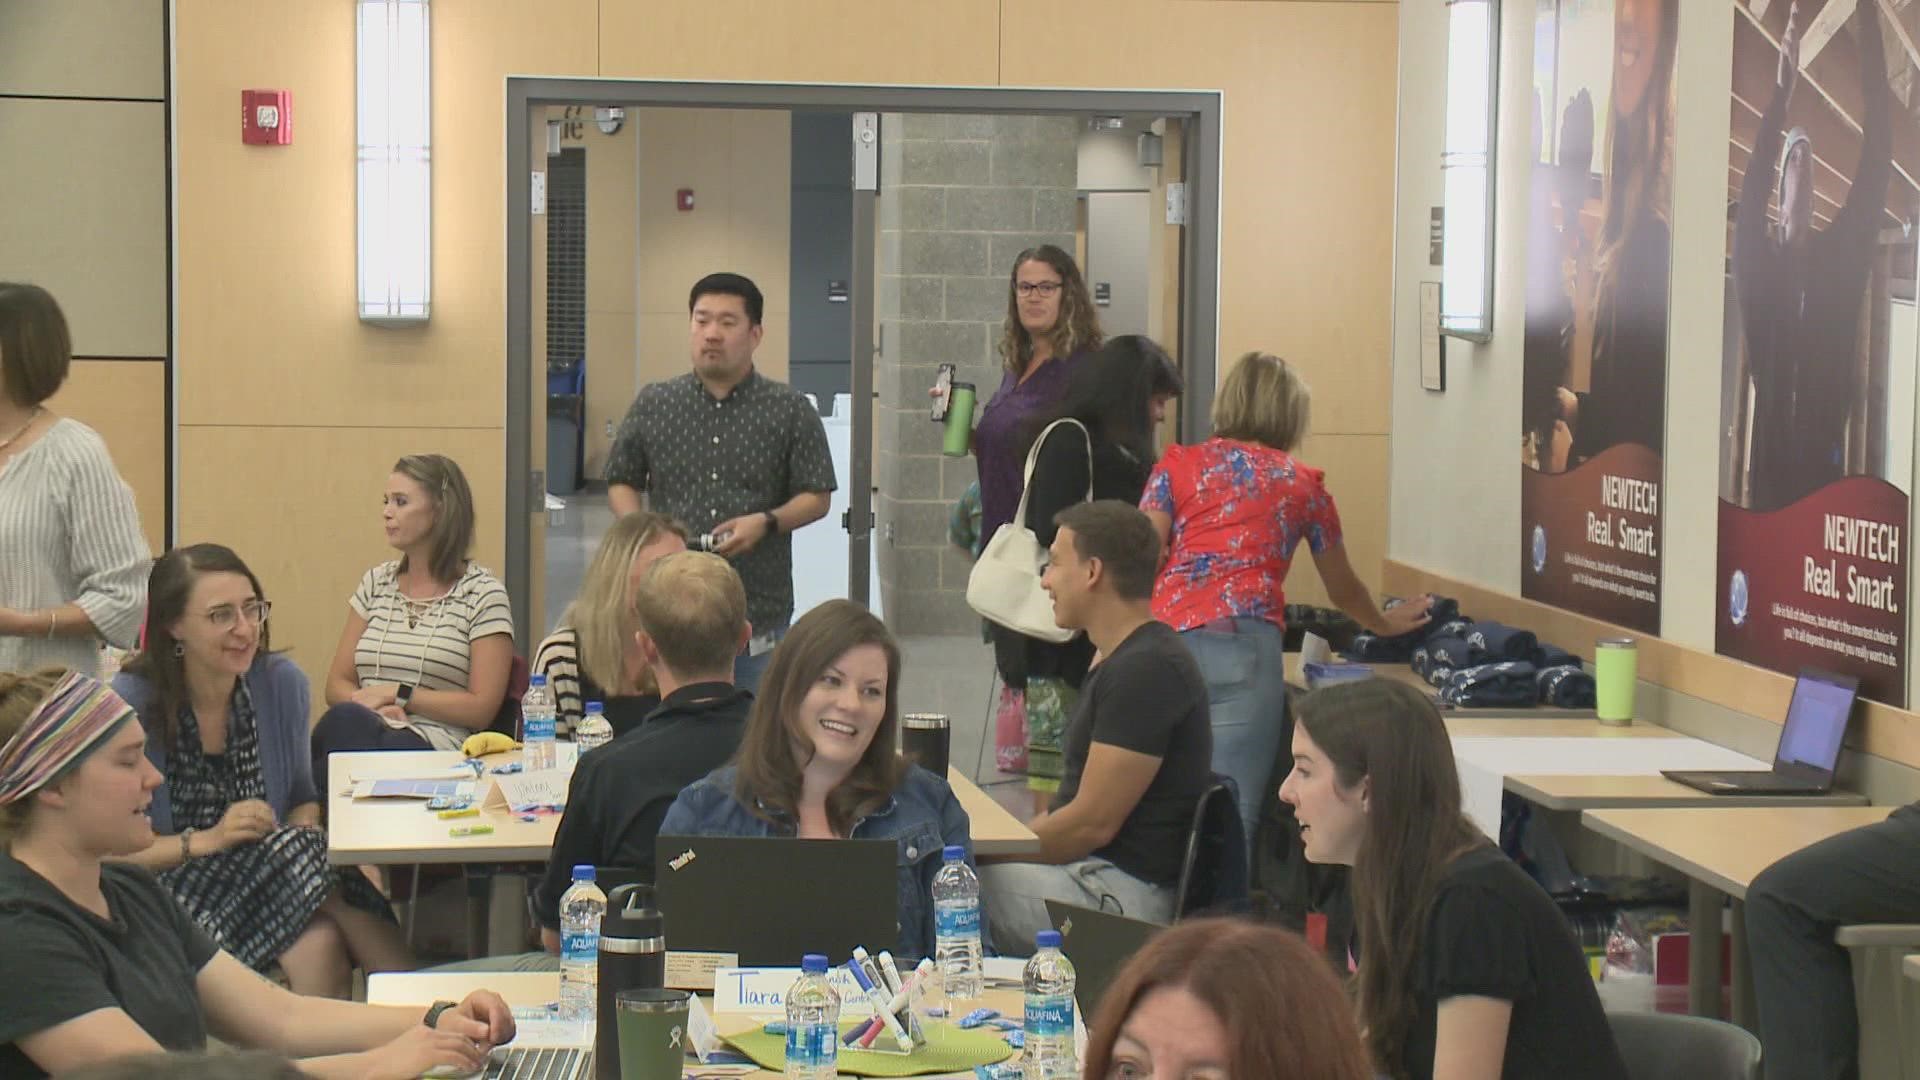 New teachers with Spokane Public Schools gathered to get ready for the new school year.